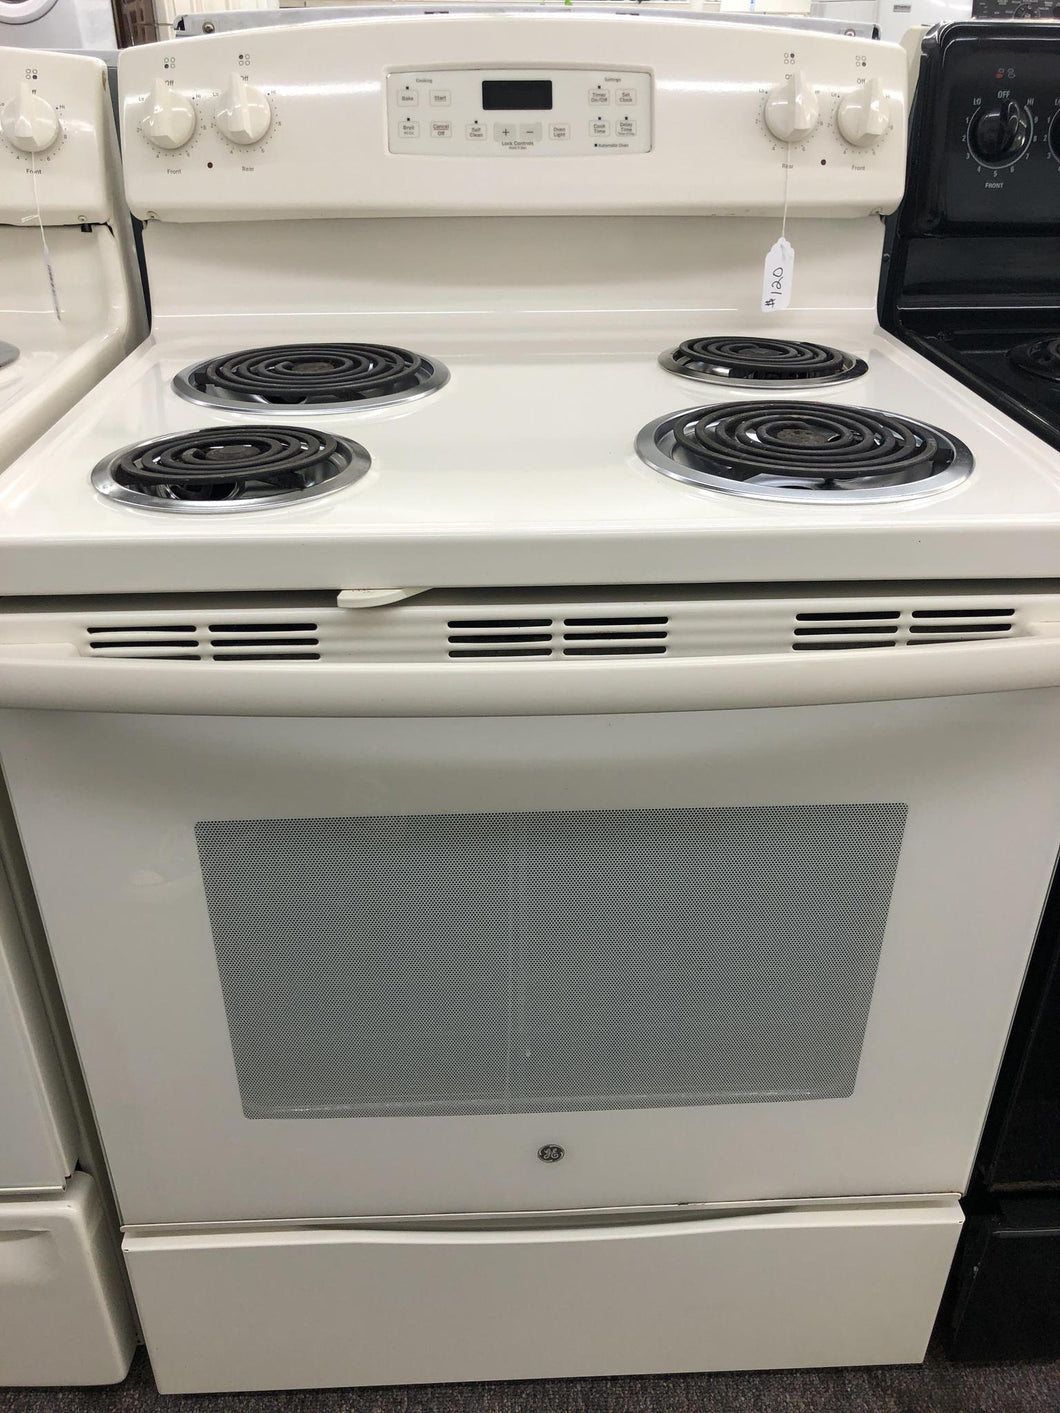 GE Electric Coil Stove - 6136